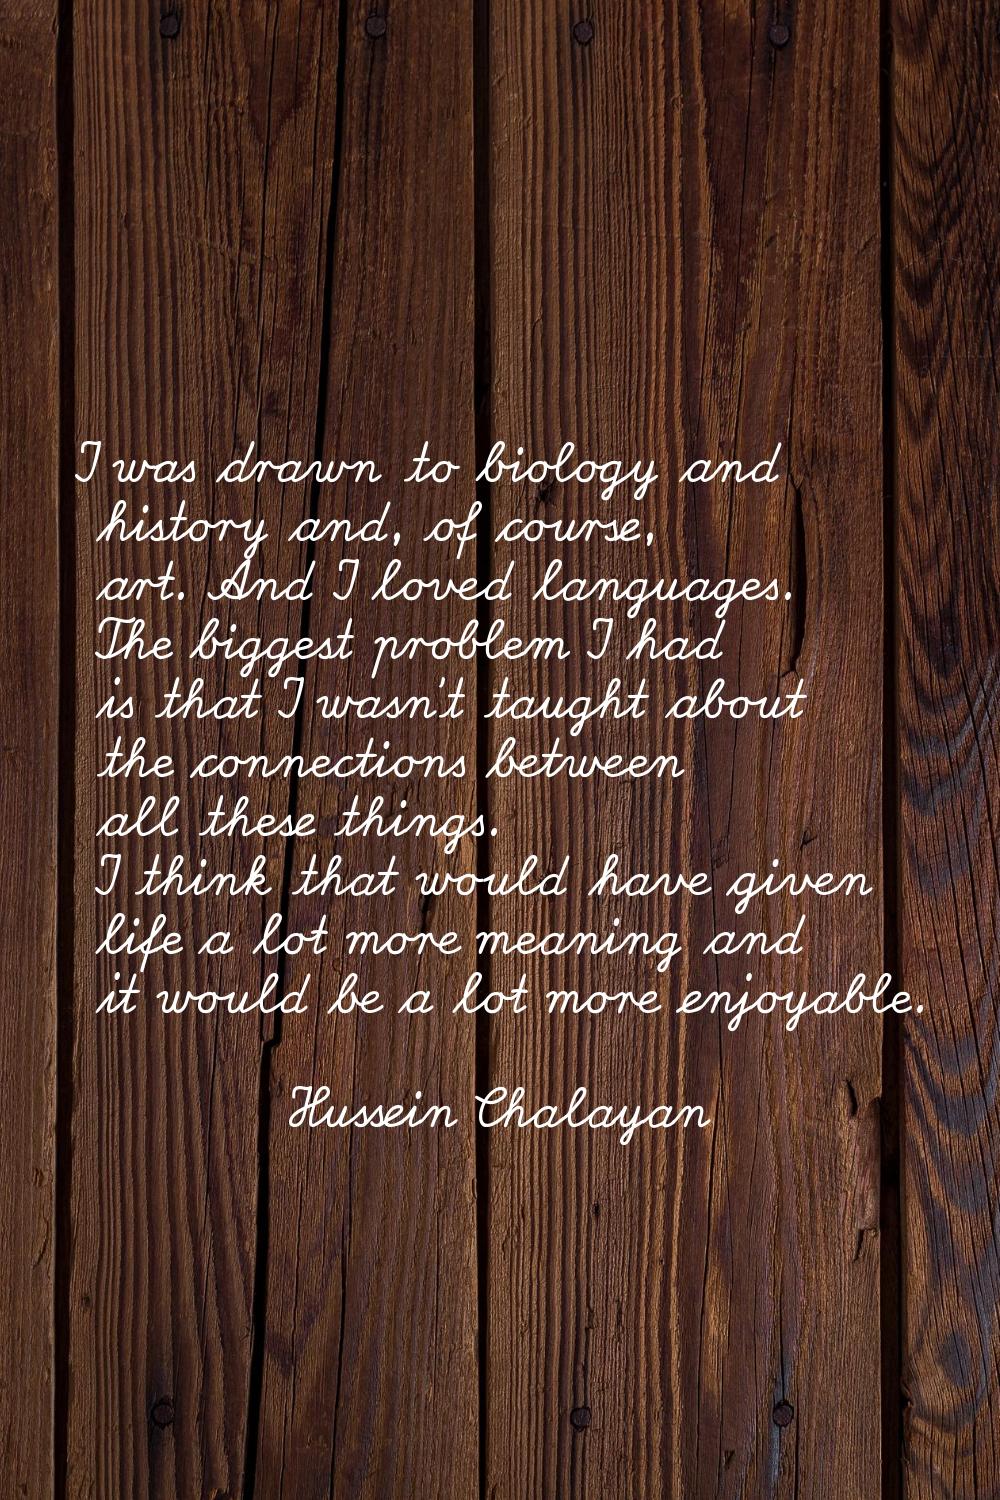 I was drawn to biology and history and, of course, art. And I loved languages. The biggest problem 